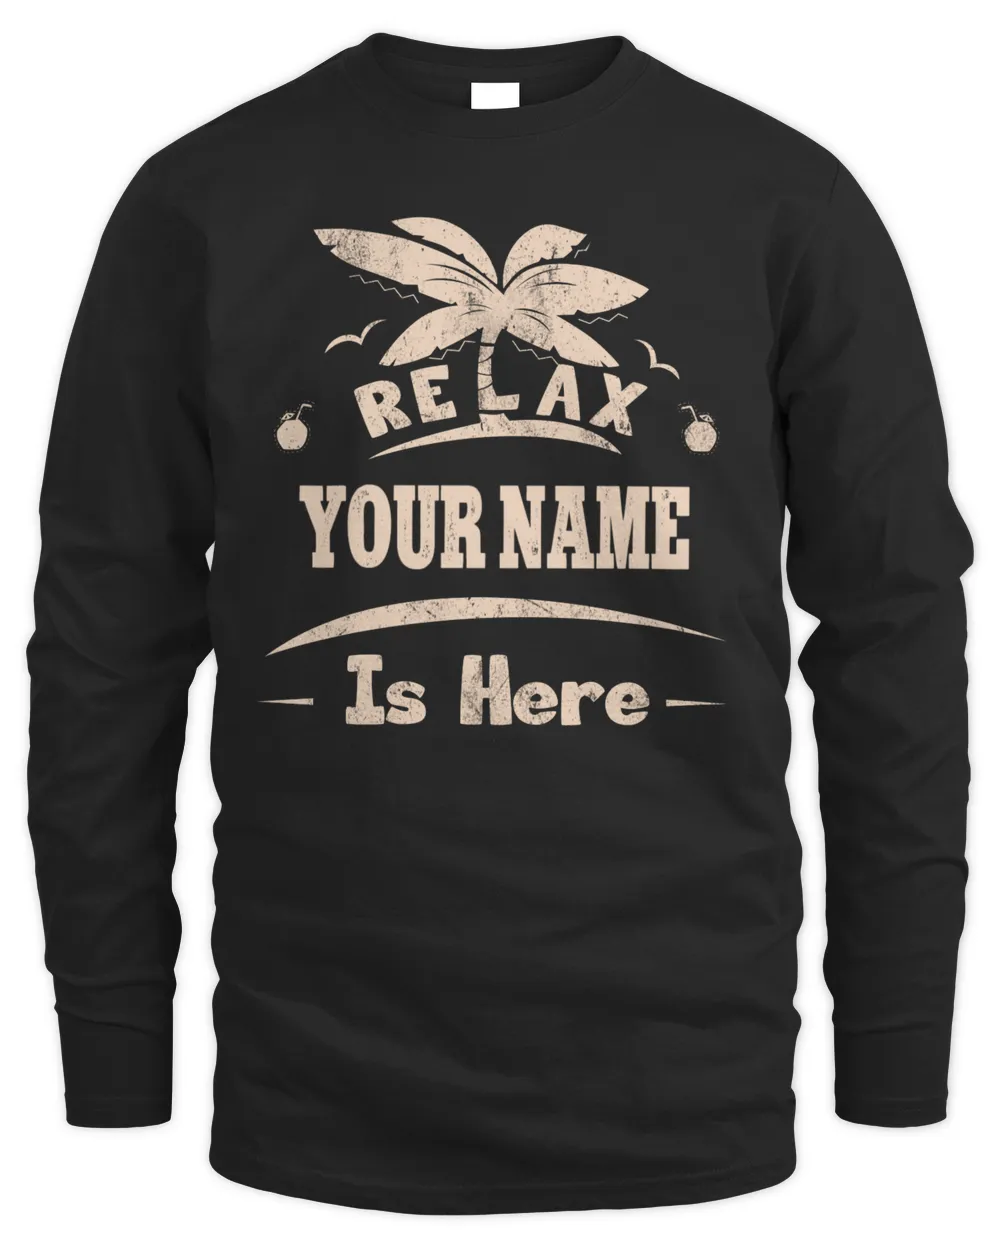 Relax YOUR NAME is Here